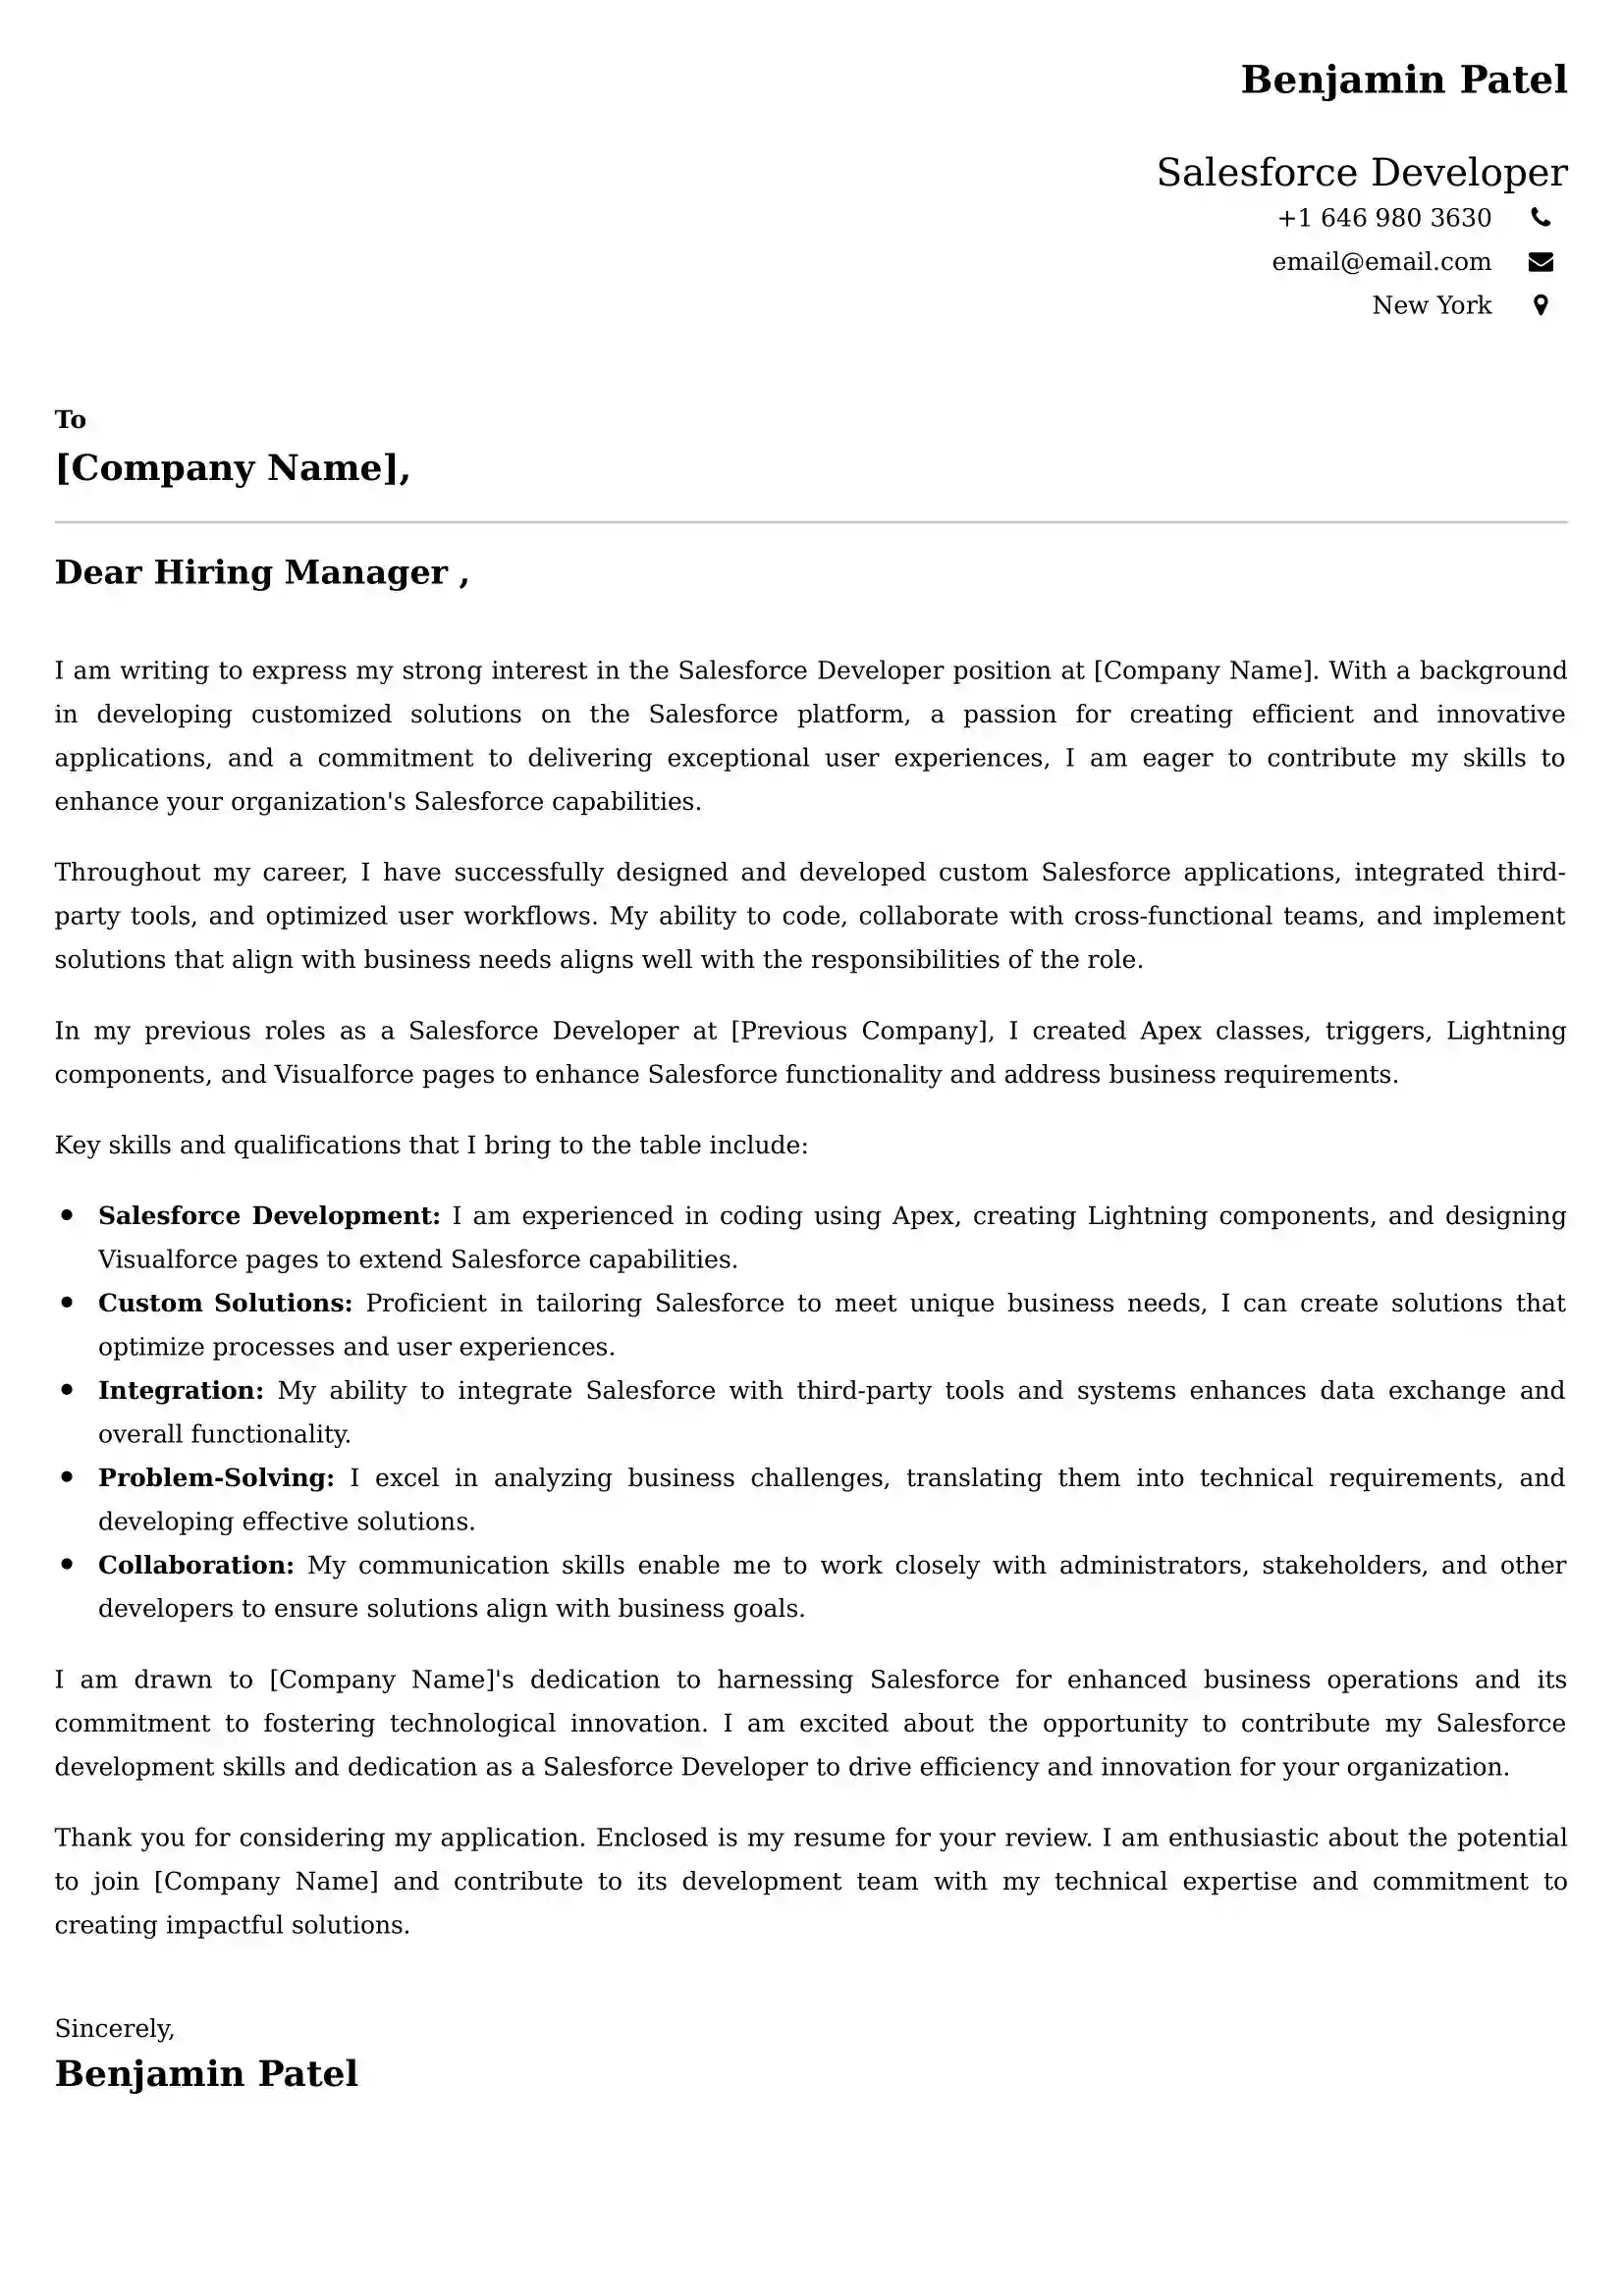 Salesforce Developer Cover Letter Examples - US Format and Tips